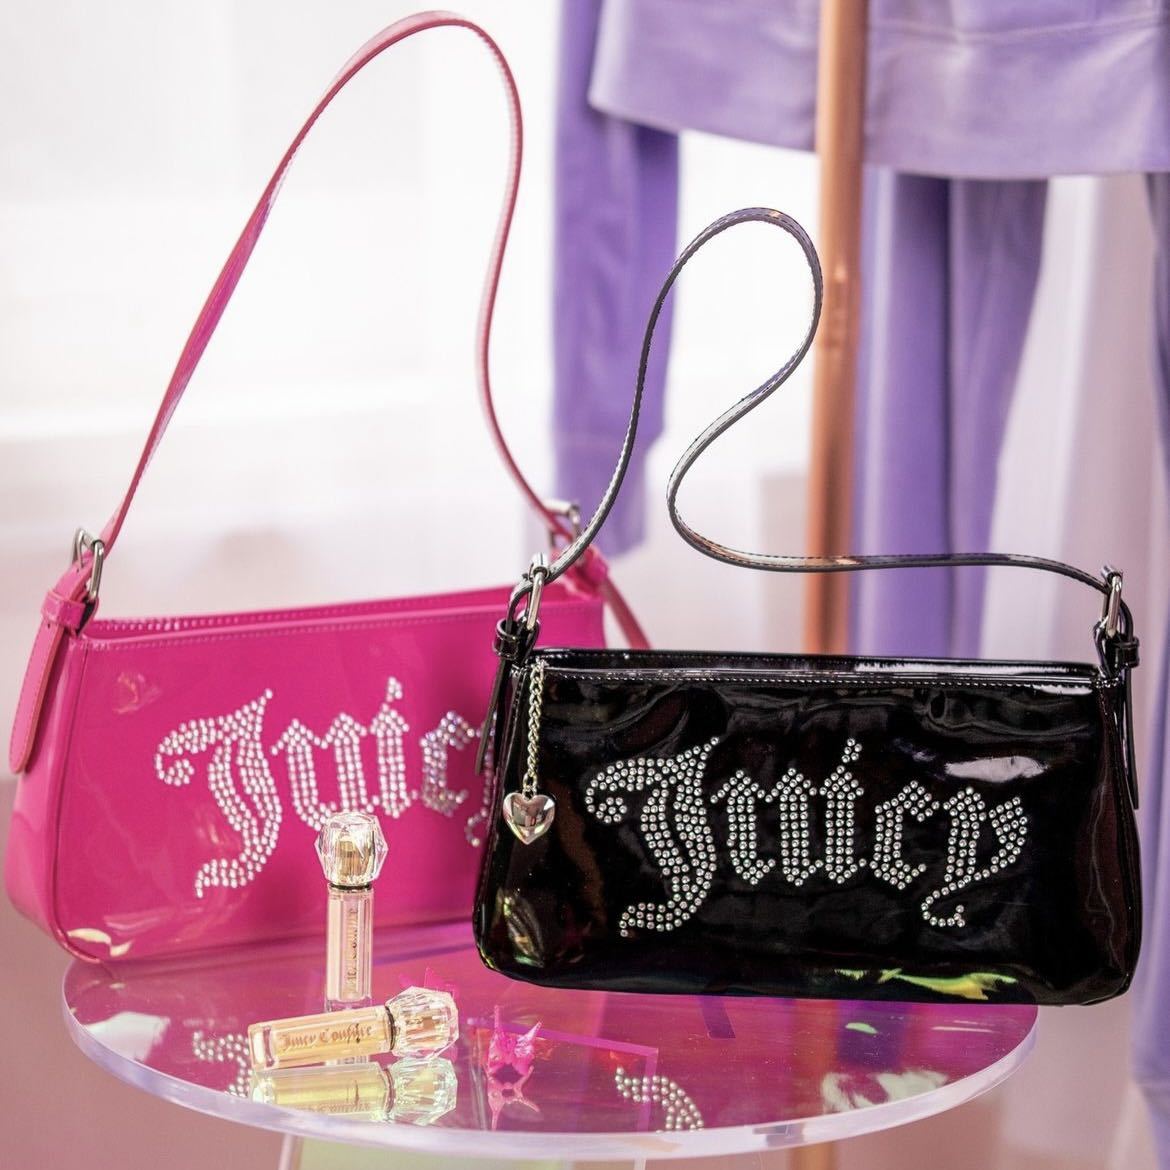 Juicy Couture ベロア キラキラ ストーン ポーチ クラッチバッグ 